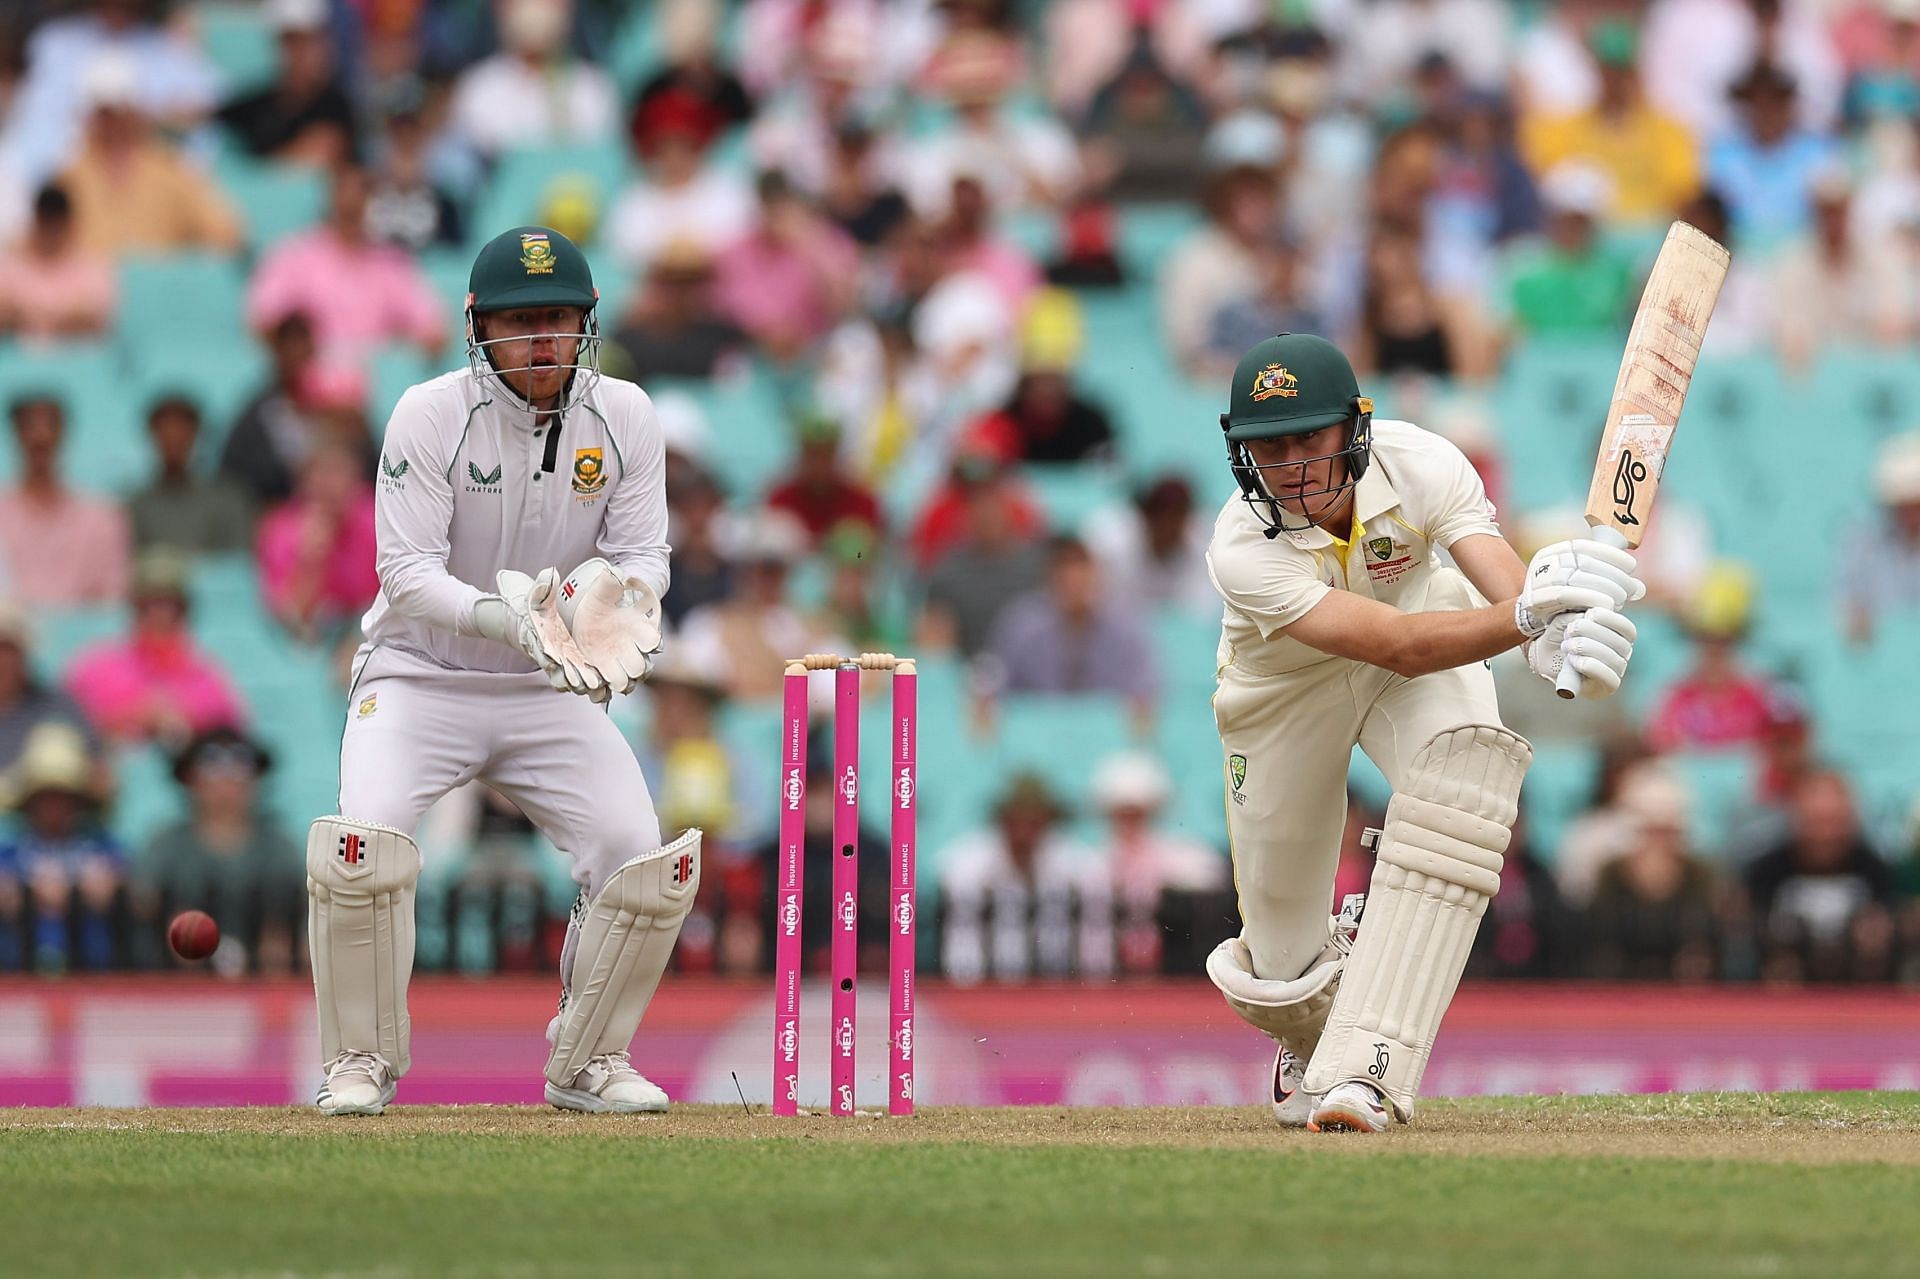 The Aussie batter during the SCG Test against South Africa. Pic: Getty Images